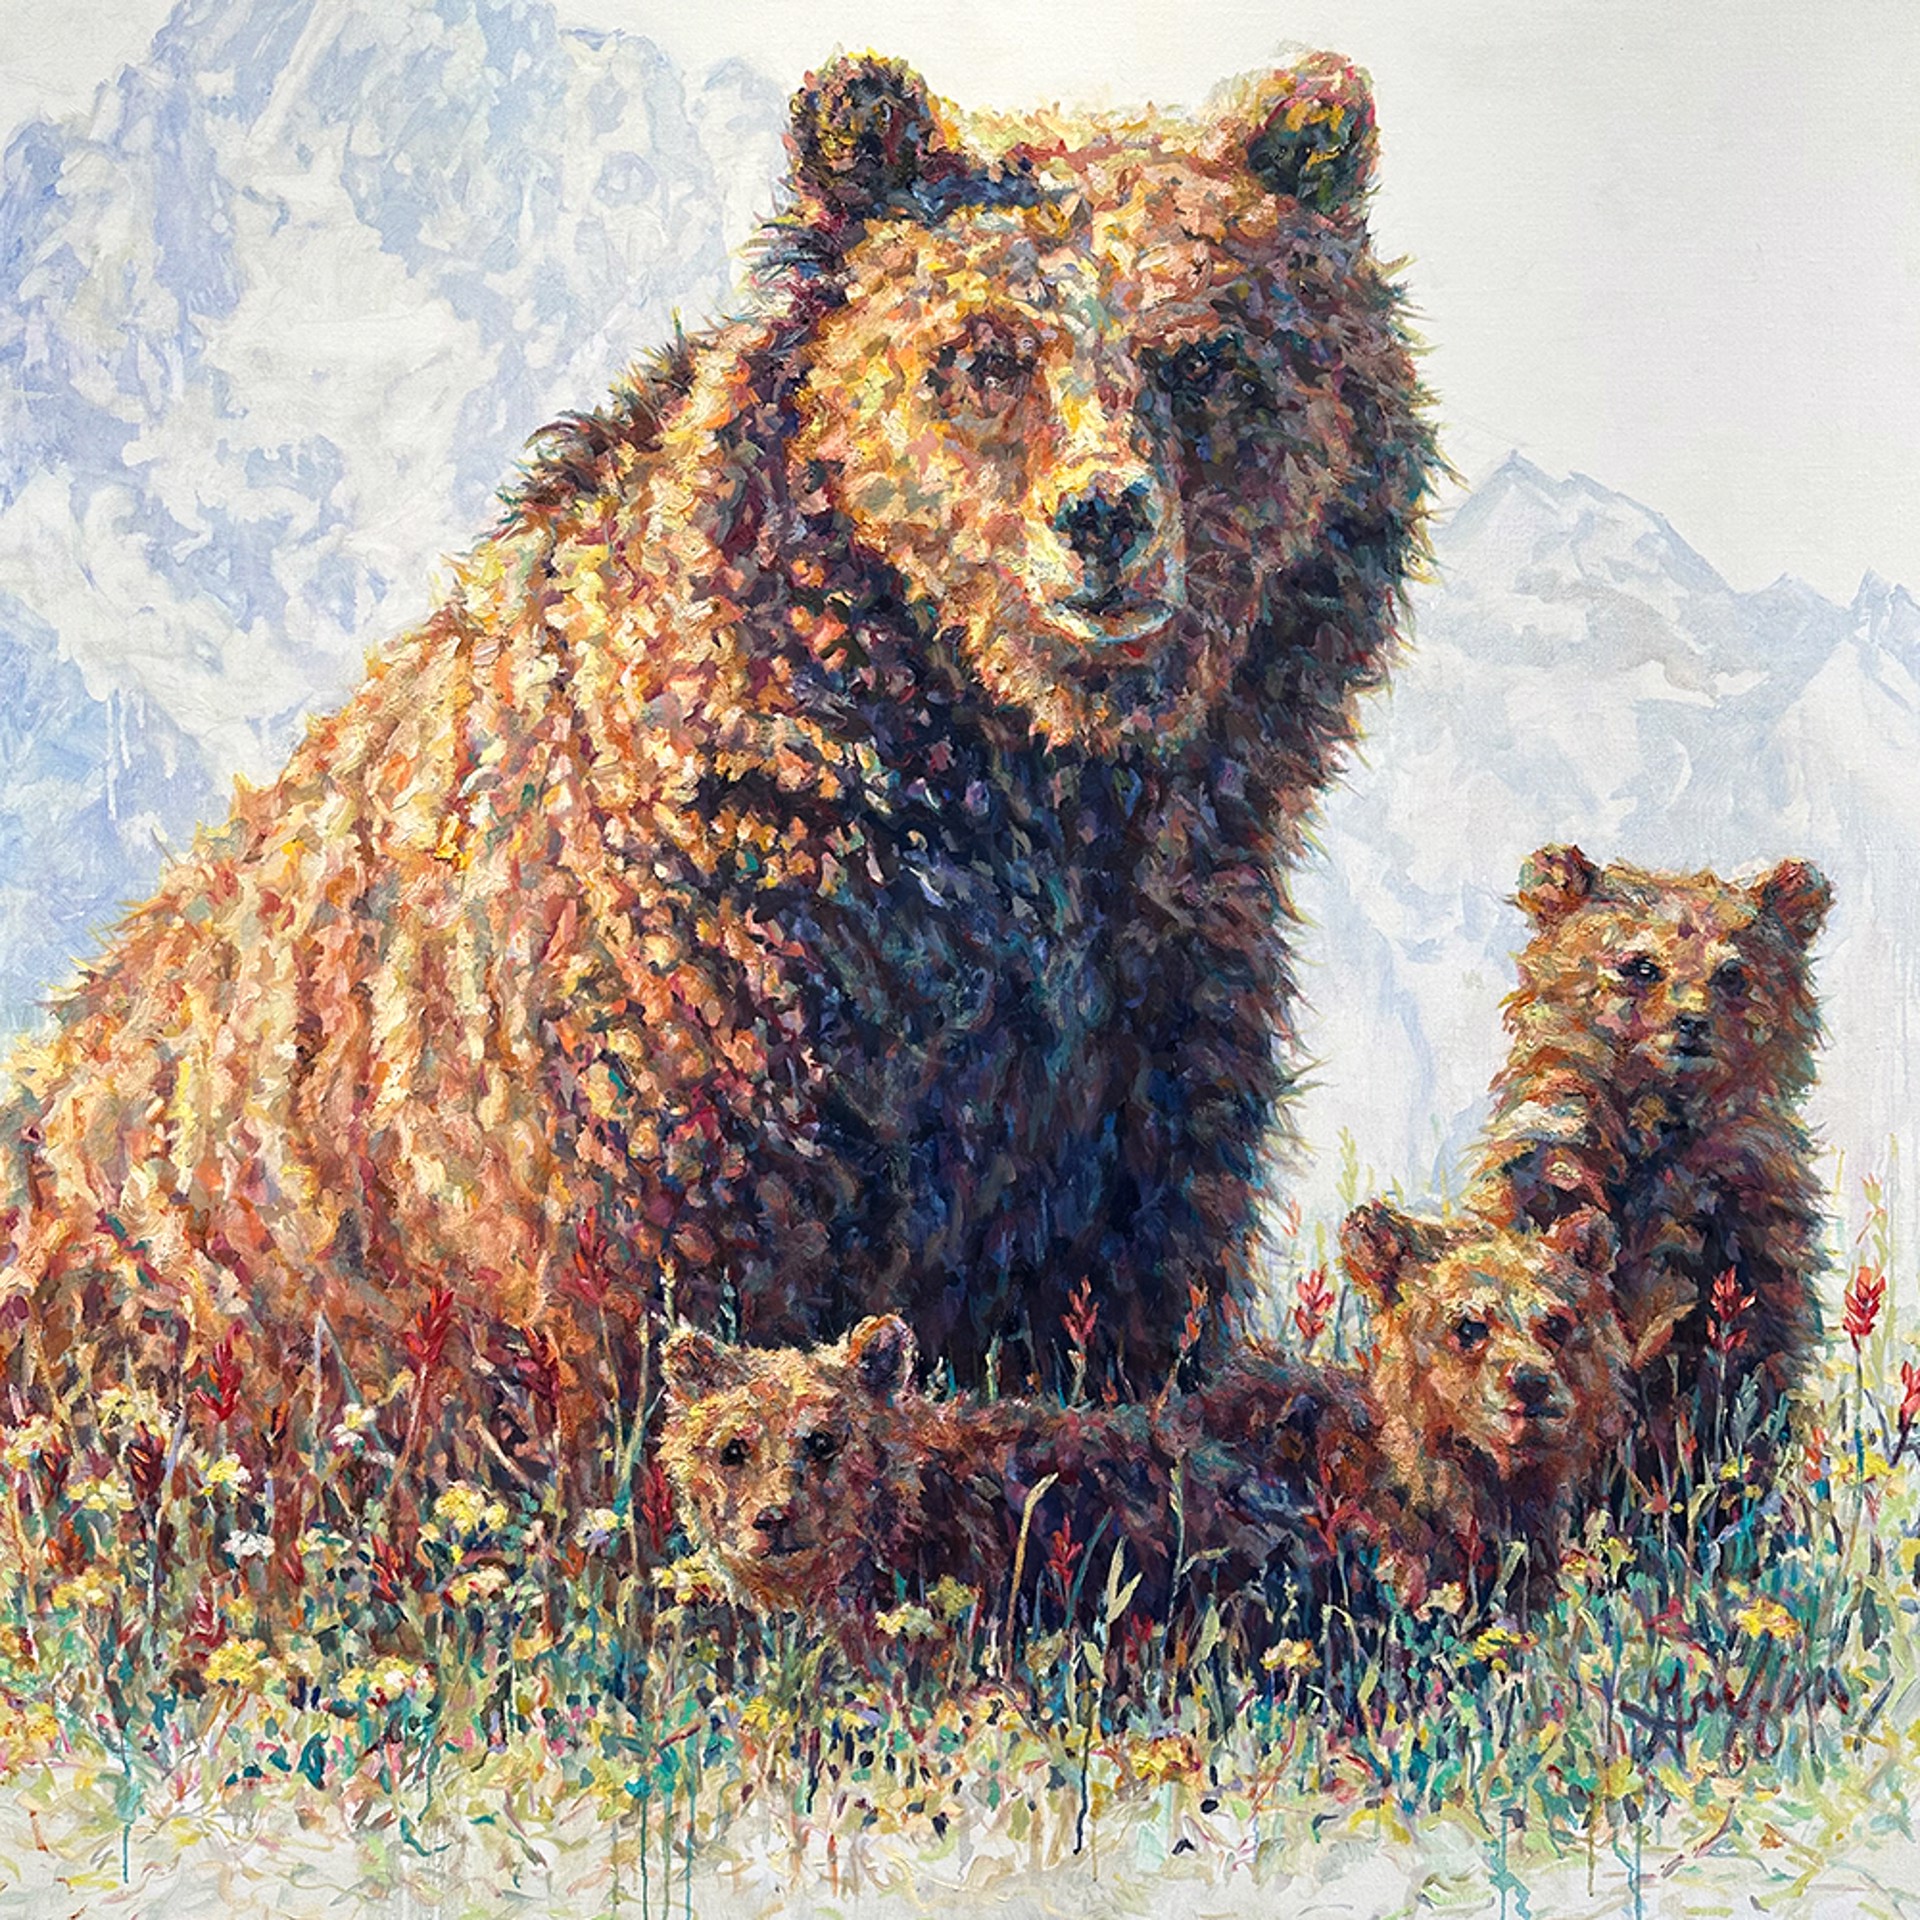 Original Oil Painting By Patricia Griffin Featuring A Mamma Grizzly Bear With Three Cubs In A Field Of Wildflowers